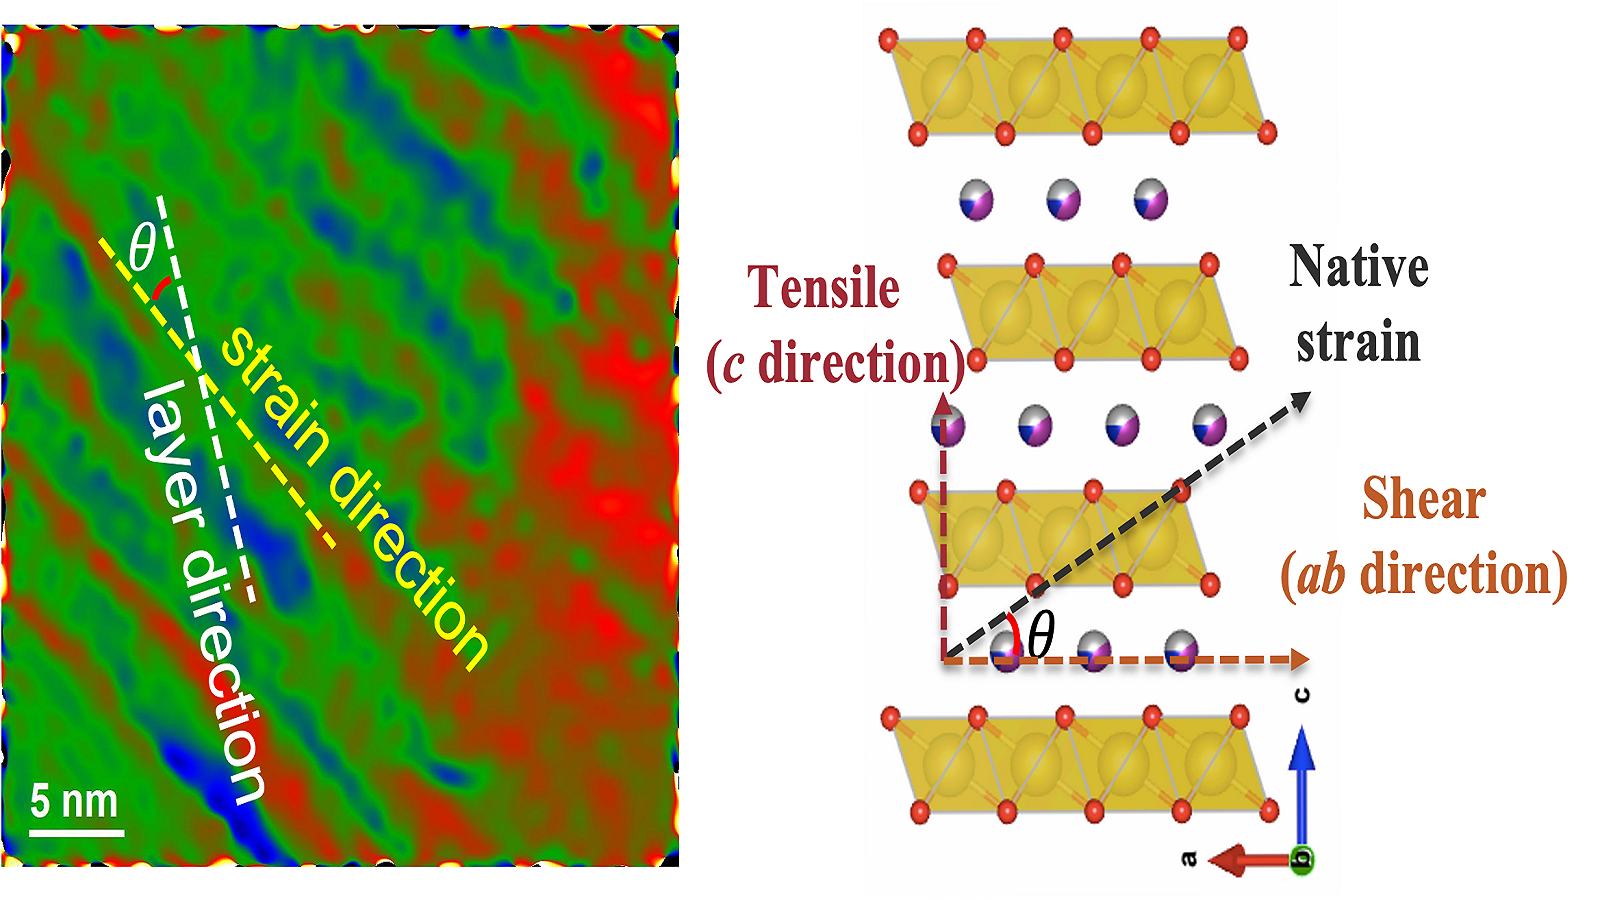 Renditions of layer and strain direction in red, blue, green; blocks and dots with graph labeled Tensile (c direction), Native strain, Shear (ab direction).(Image by Argonne National Laboratory.)